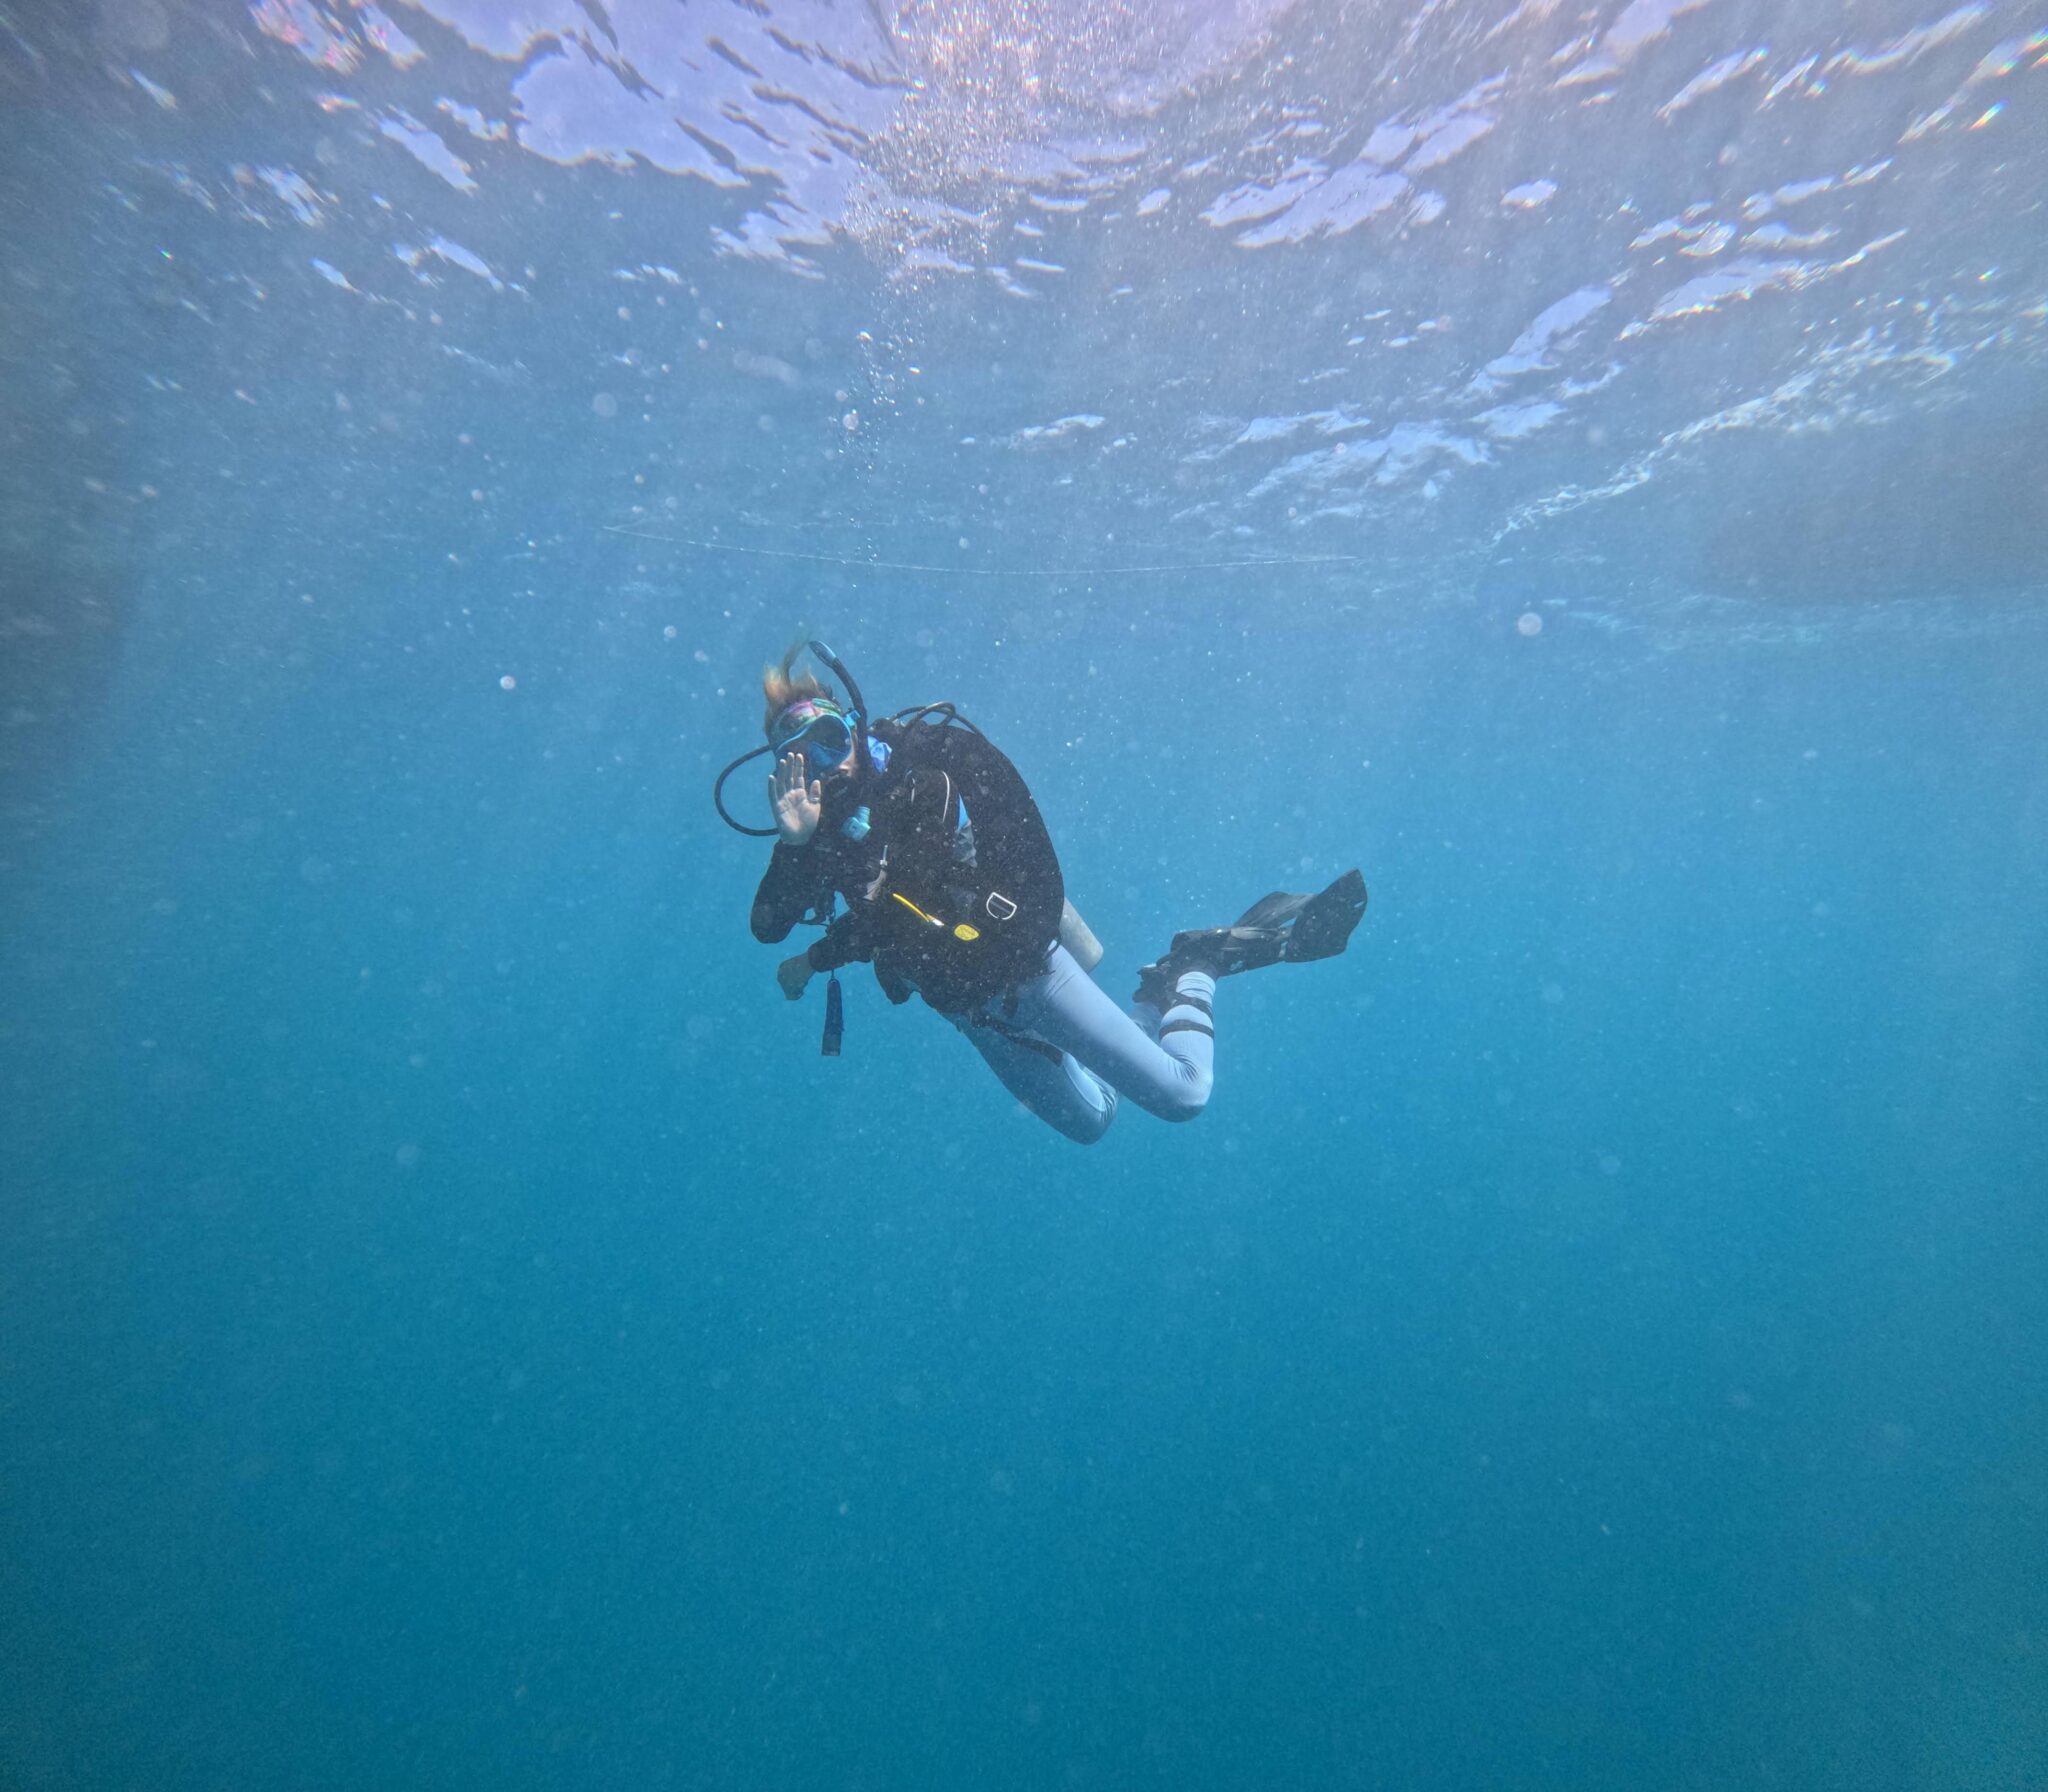 Skye floating in the sea during her Instructor Development Course in the Great Barrier Reef